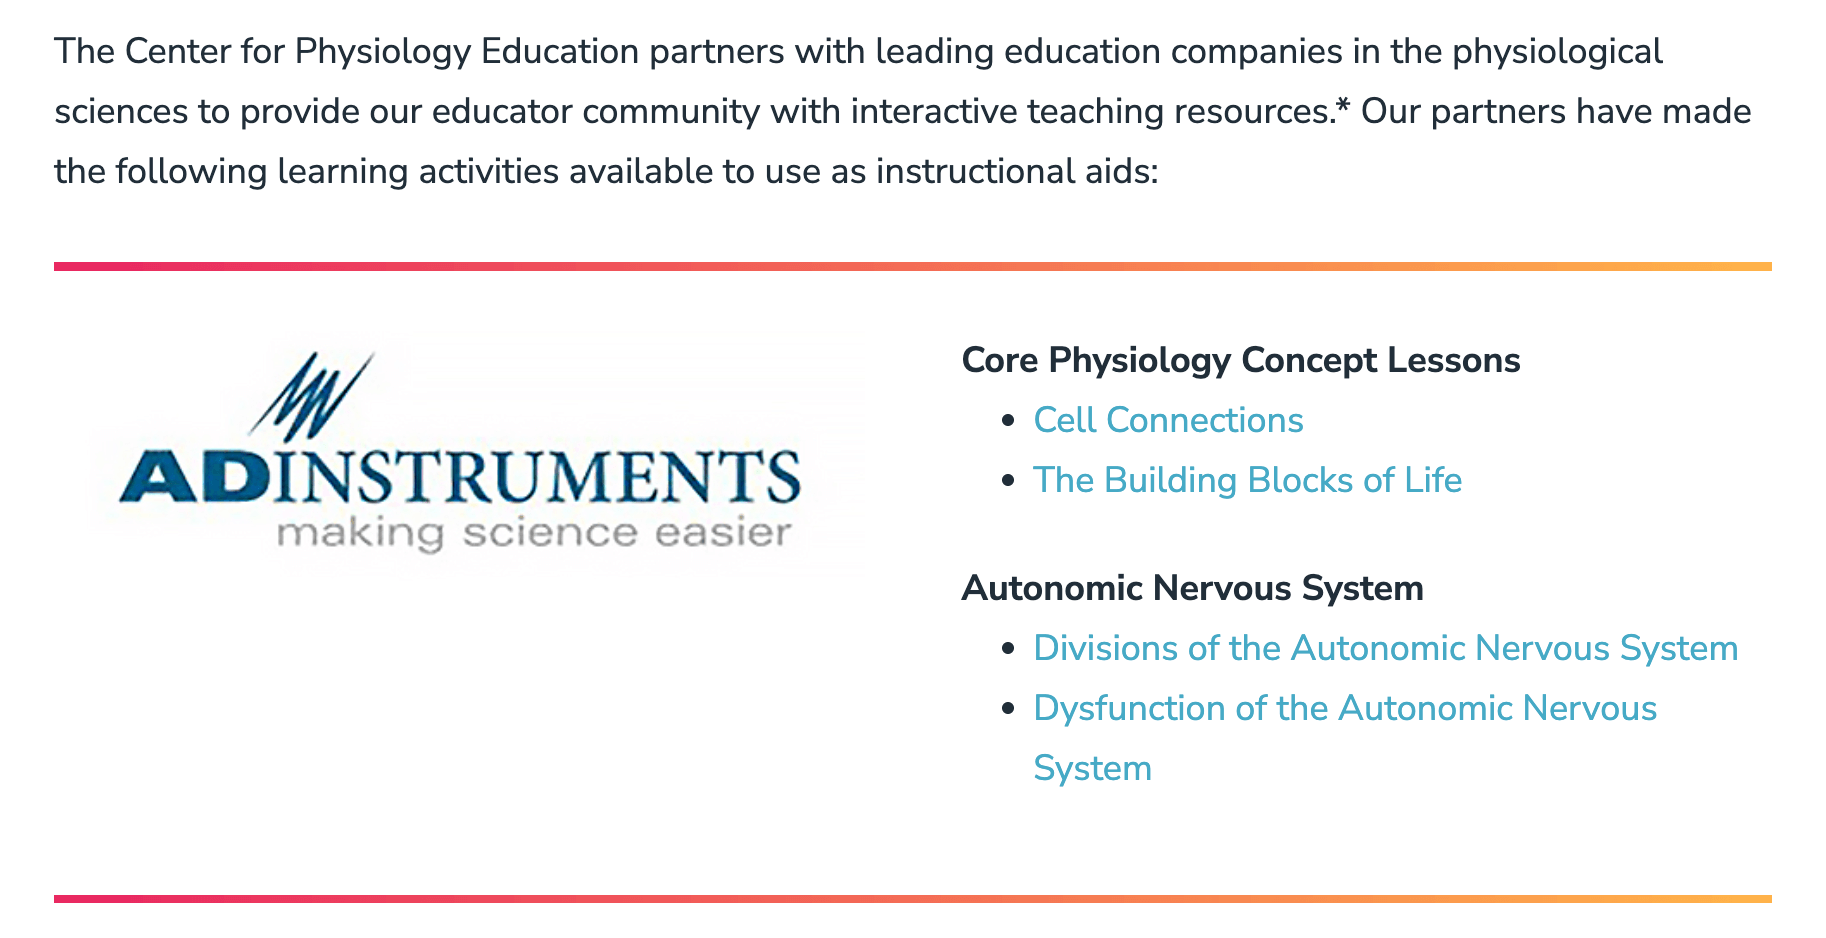 A screenshot of a web page showing the text "The Center for Physiology Education partners with leading education companies in the physiological sciences to provide our educator community with interactive teaching resources. Our partners have made the following learning activities available to use as instructional aids:". Below this text, there is the ADInstruments logo and two sets of bullet points. The first set of bullet points is titled "Core Physiology Concept Lessons", and contains "Cell Connections" and "The Building Blocks of Life". The second set of bullet points is titled "Autonomic Nervous System" and contains "Divisions of the Autonomic Nervous System" and "Dysfunction of the Autonomic Nervous System".